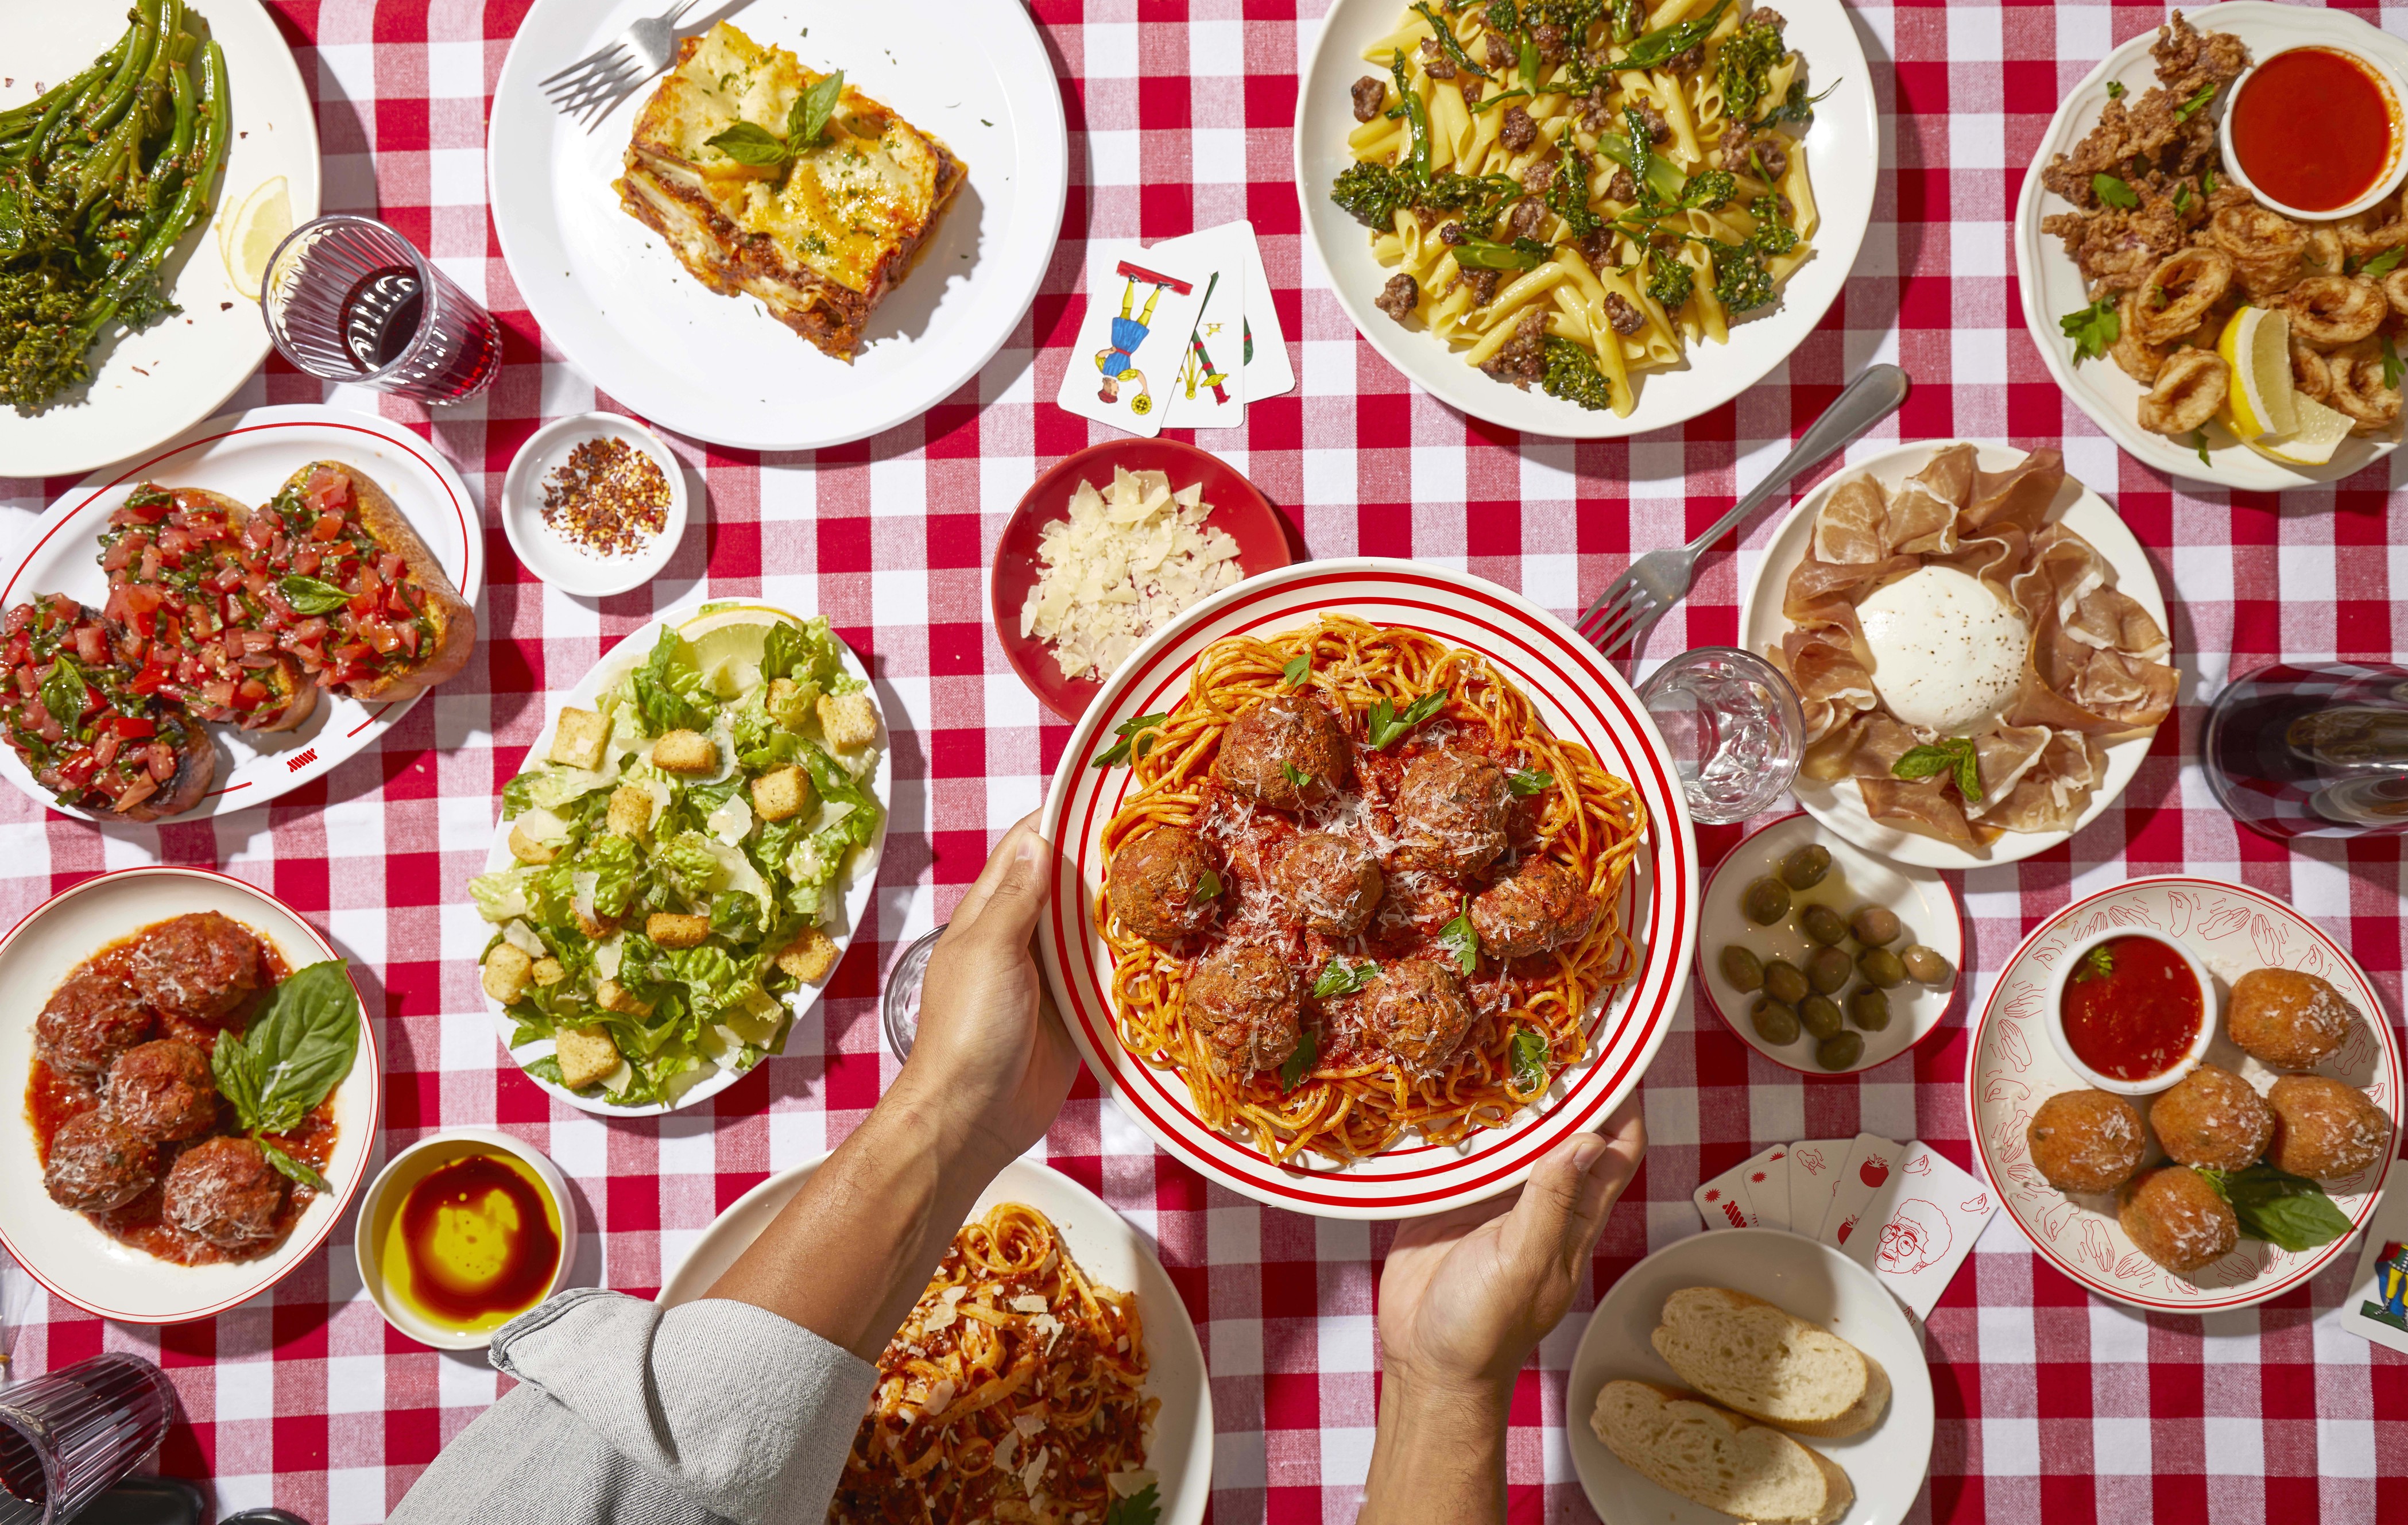 Spaghetti and Meatballs on Red and White Checkered Tablecloth